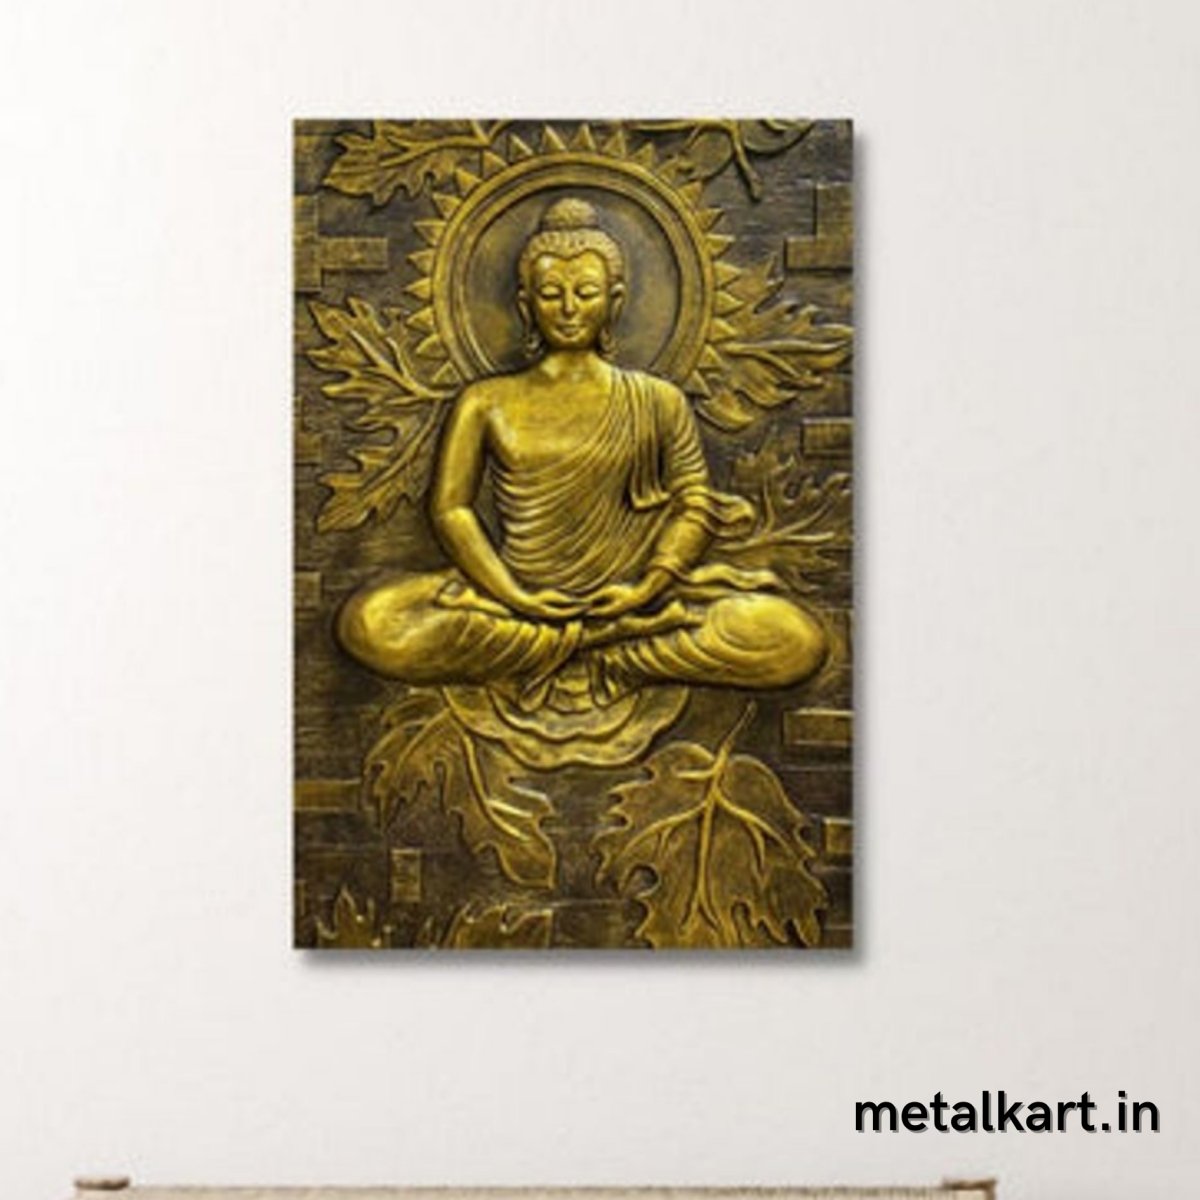 Metalkart Special Wall Mounted 3D Buddha Sculpture (36 x 24 Inches)